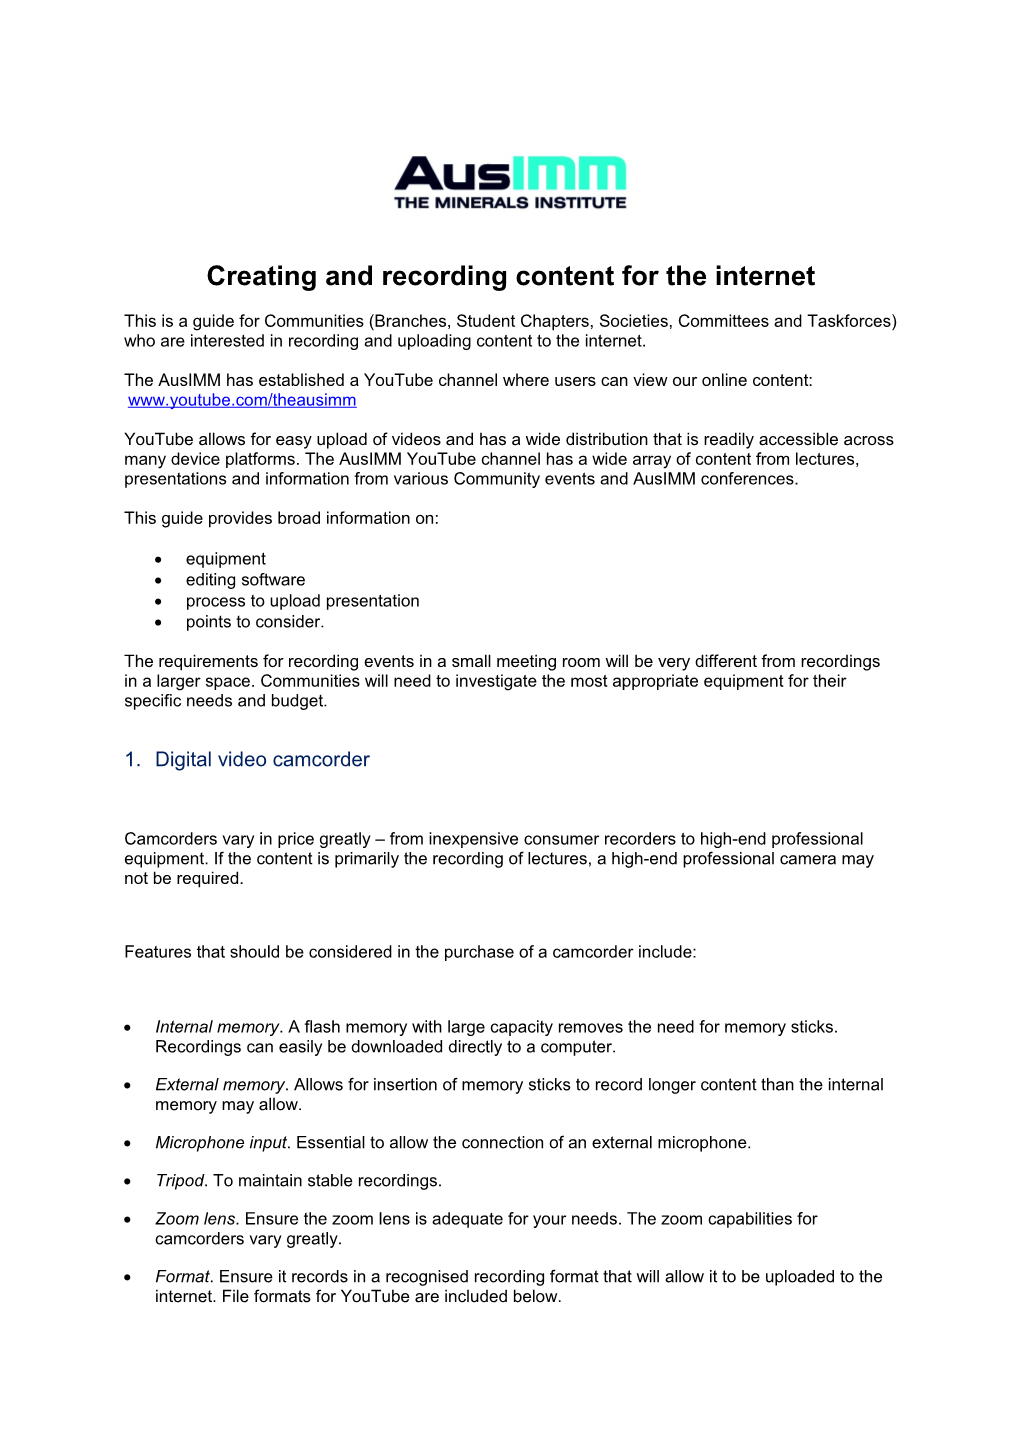 Creating and Recording Content for the Internet